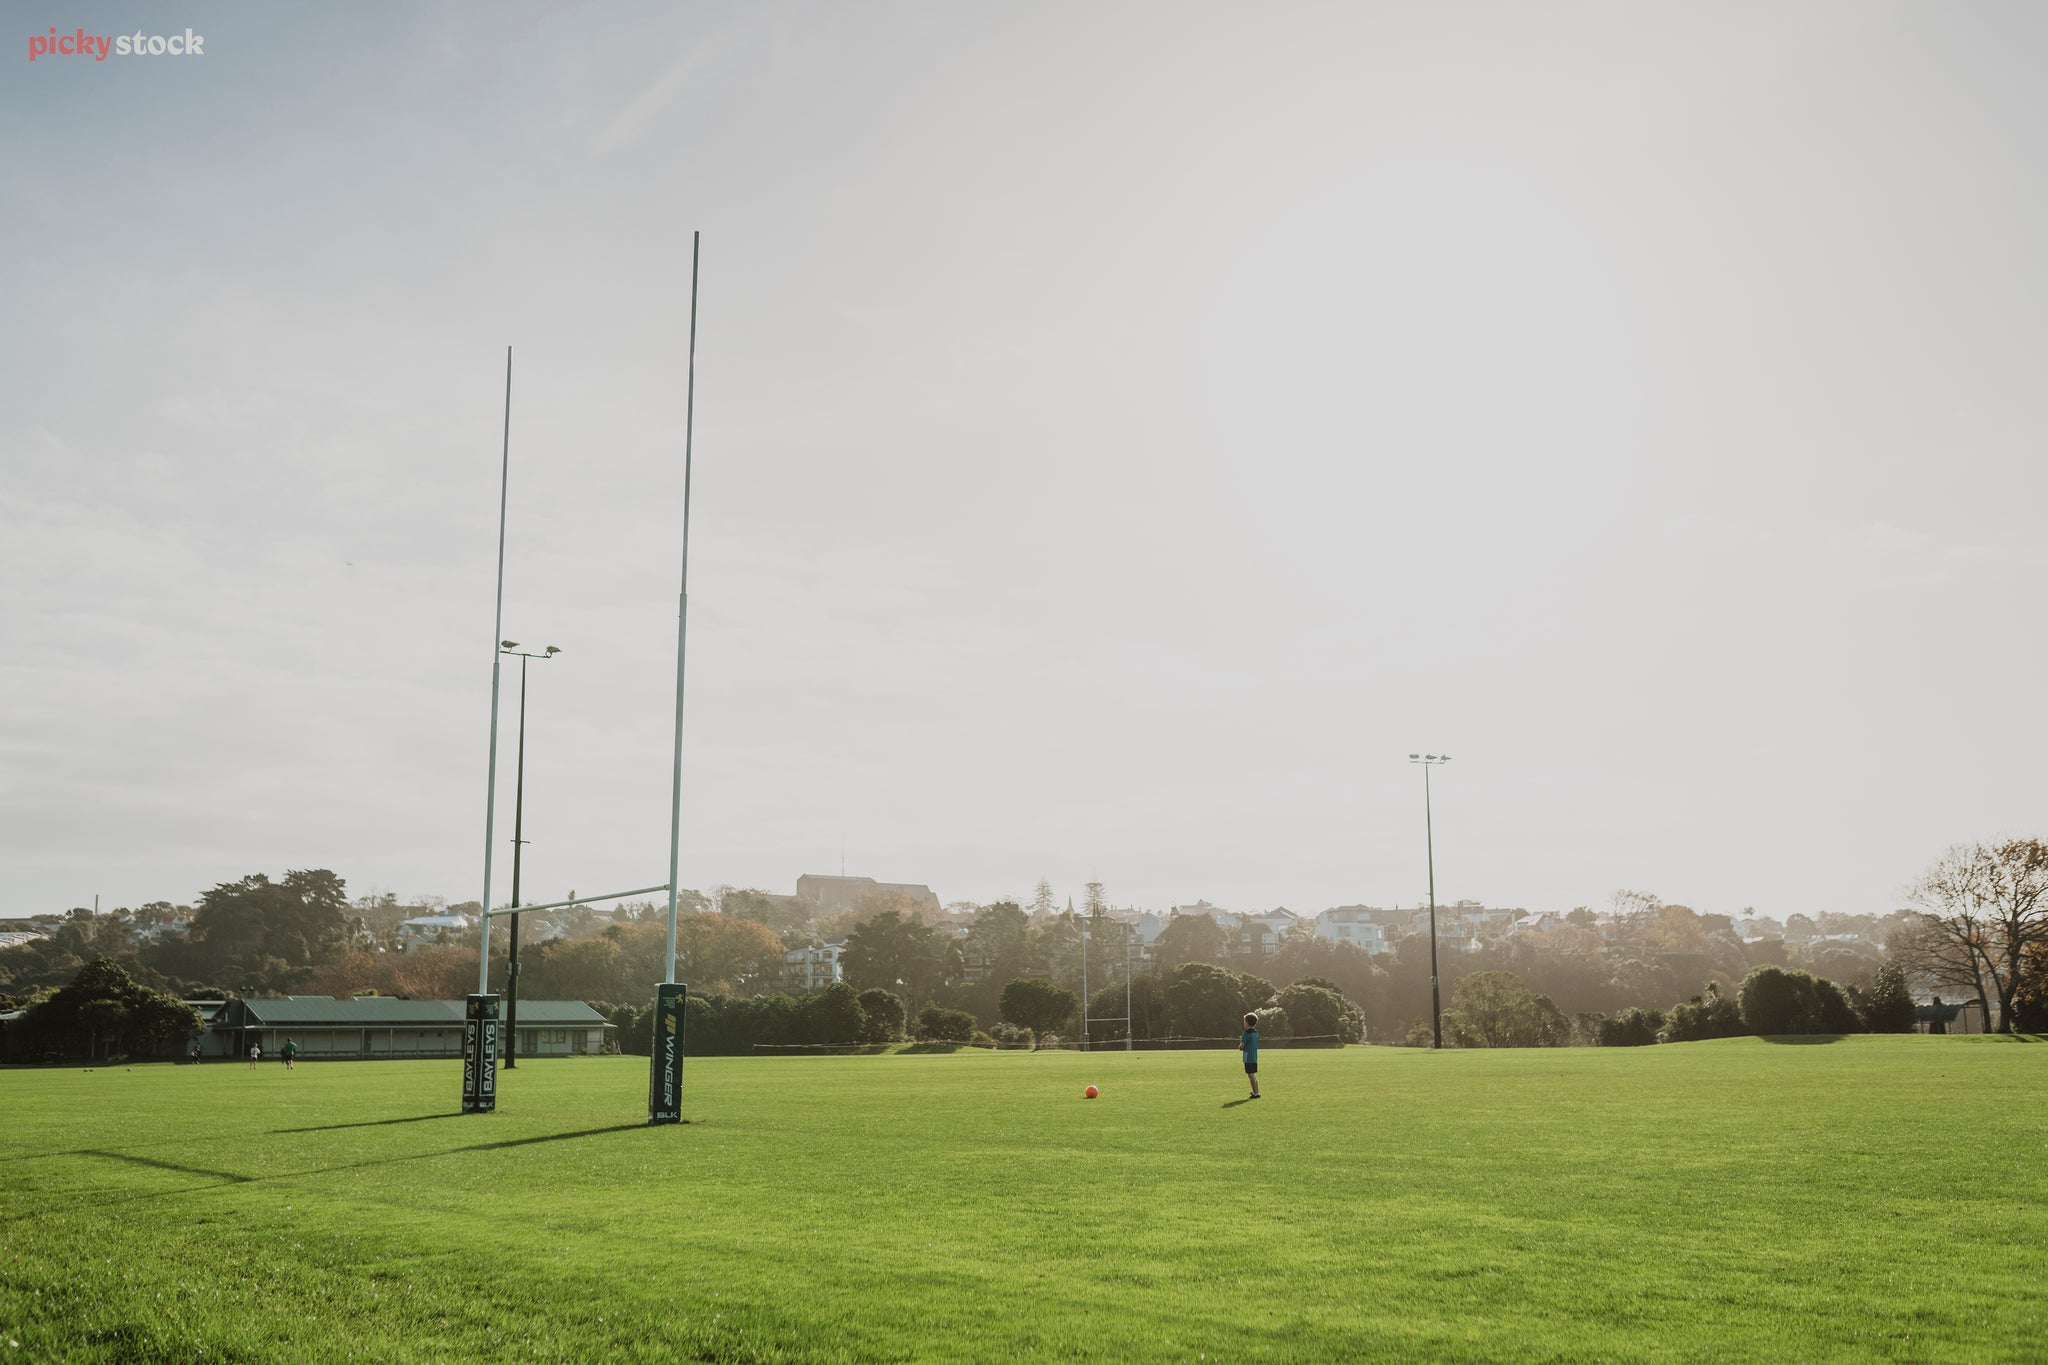 Expansive local rugby field with lush green grass. One goal post errupts into the sky, which is grey and gloomy. 